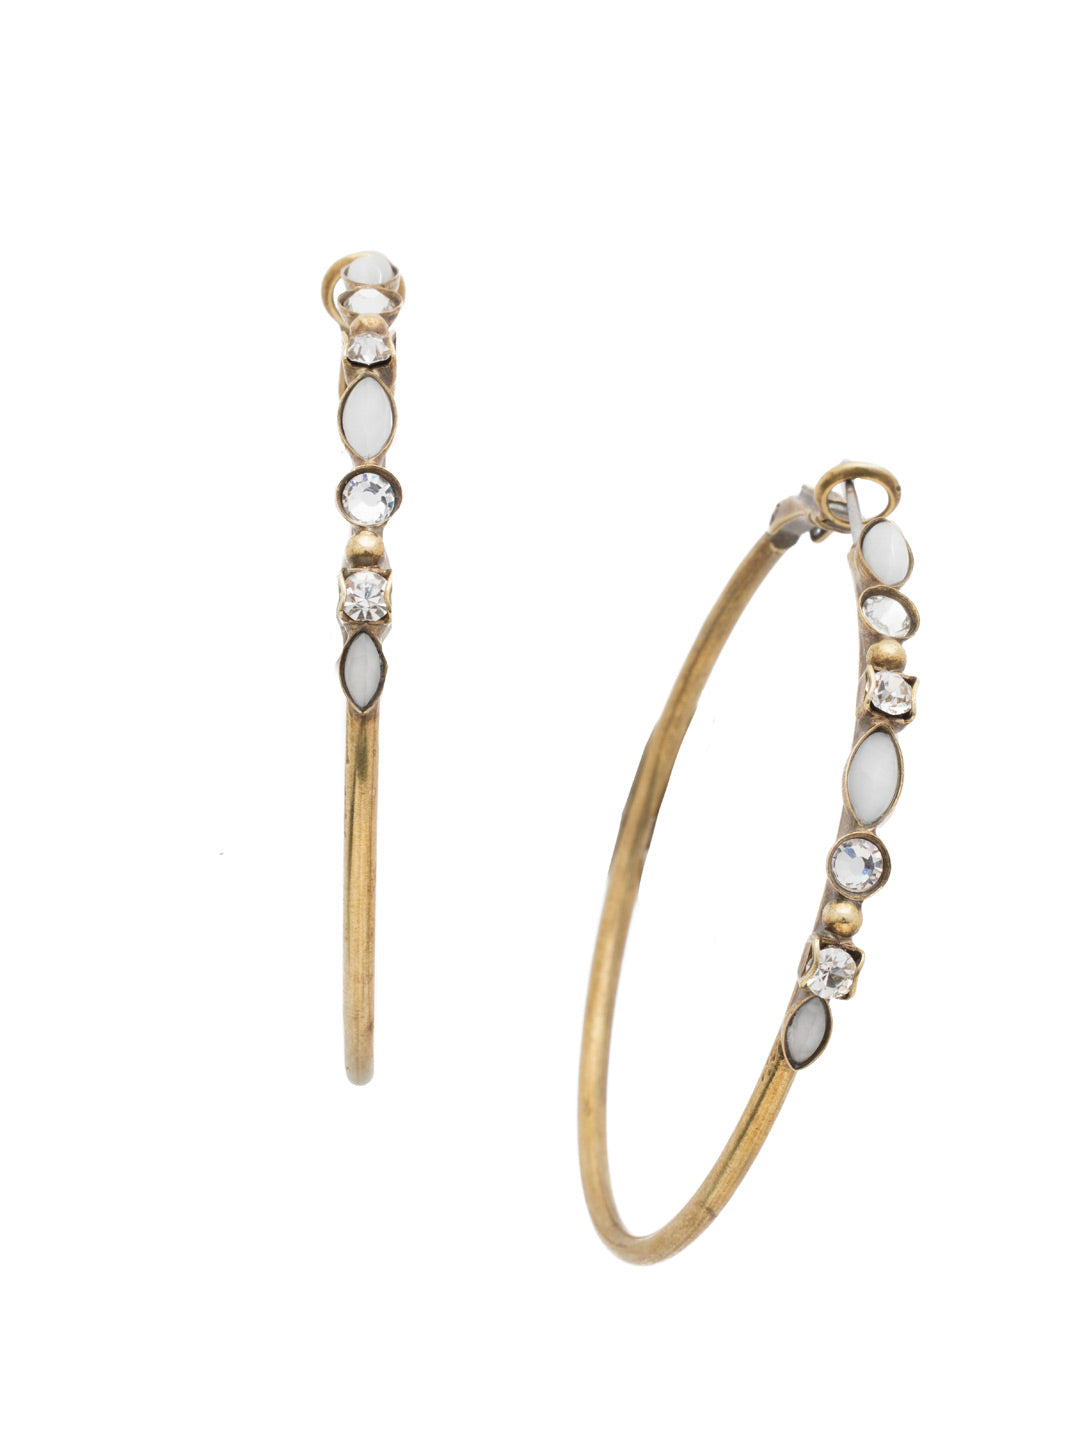 Mixed Media Hoop Earrings - EDK40AGCRY - <p>Hoop earrings with a line of assorted crystals and semi-precious stones that will add the perfect hint of sparkle to your look. From Sorrelli's Crystal collection in our Antique Gold-tone finish.</p>